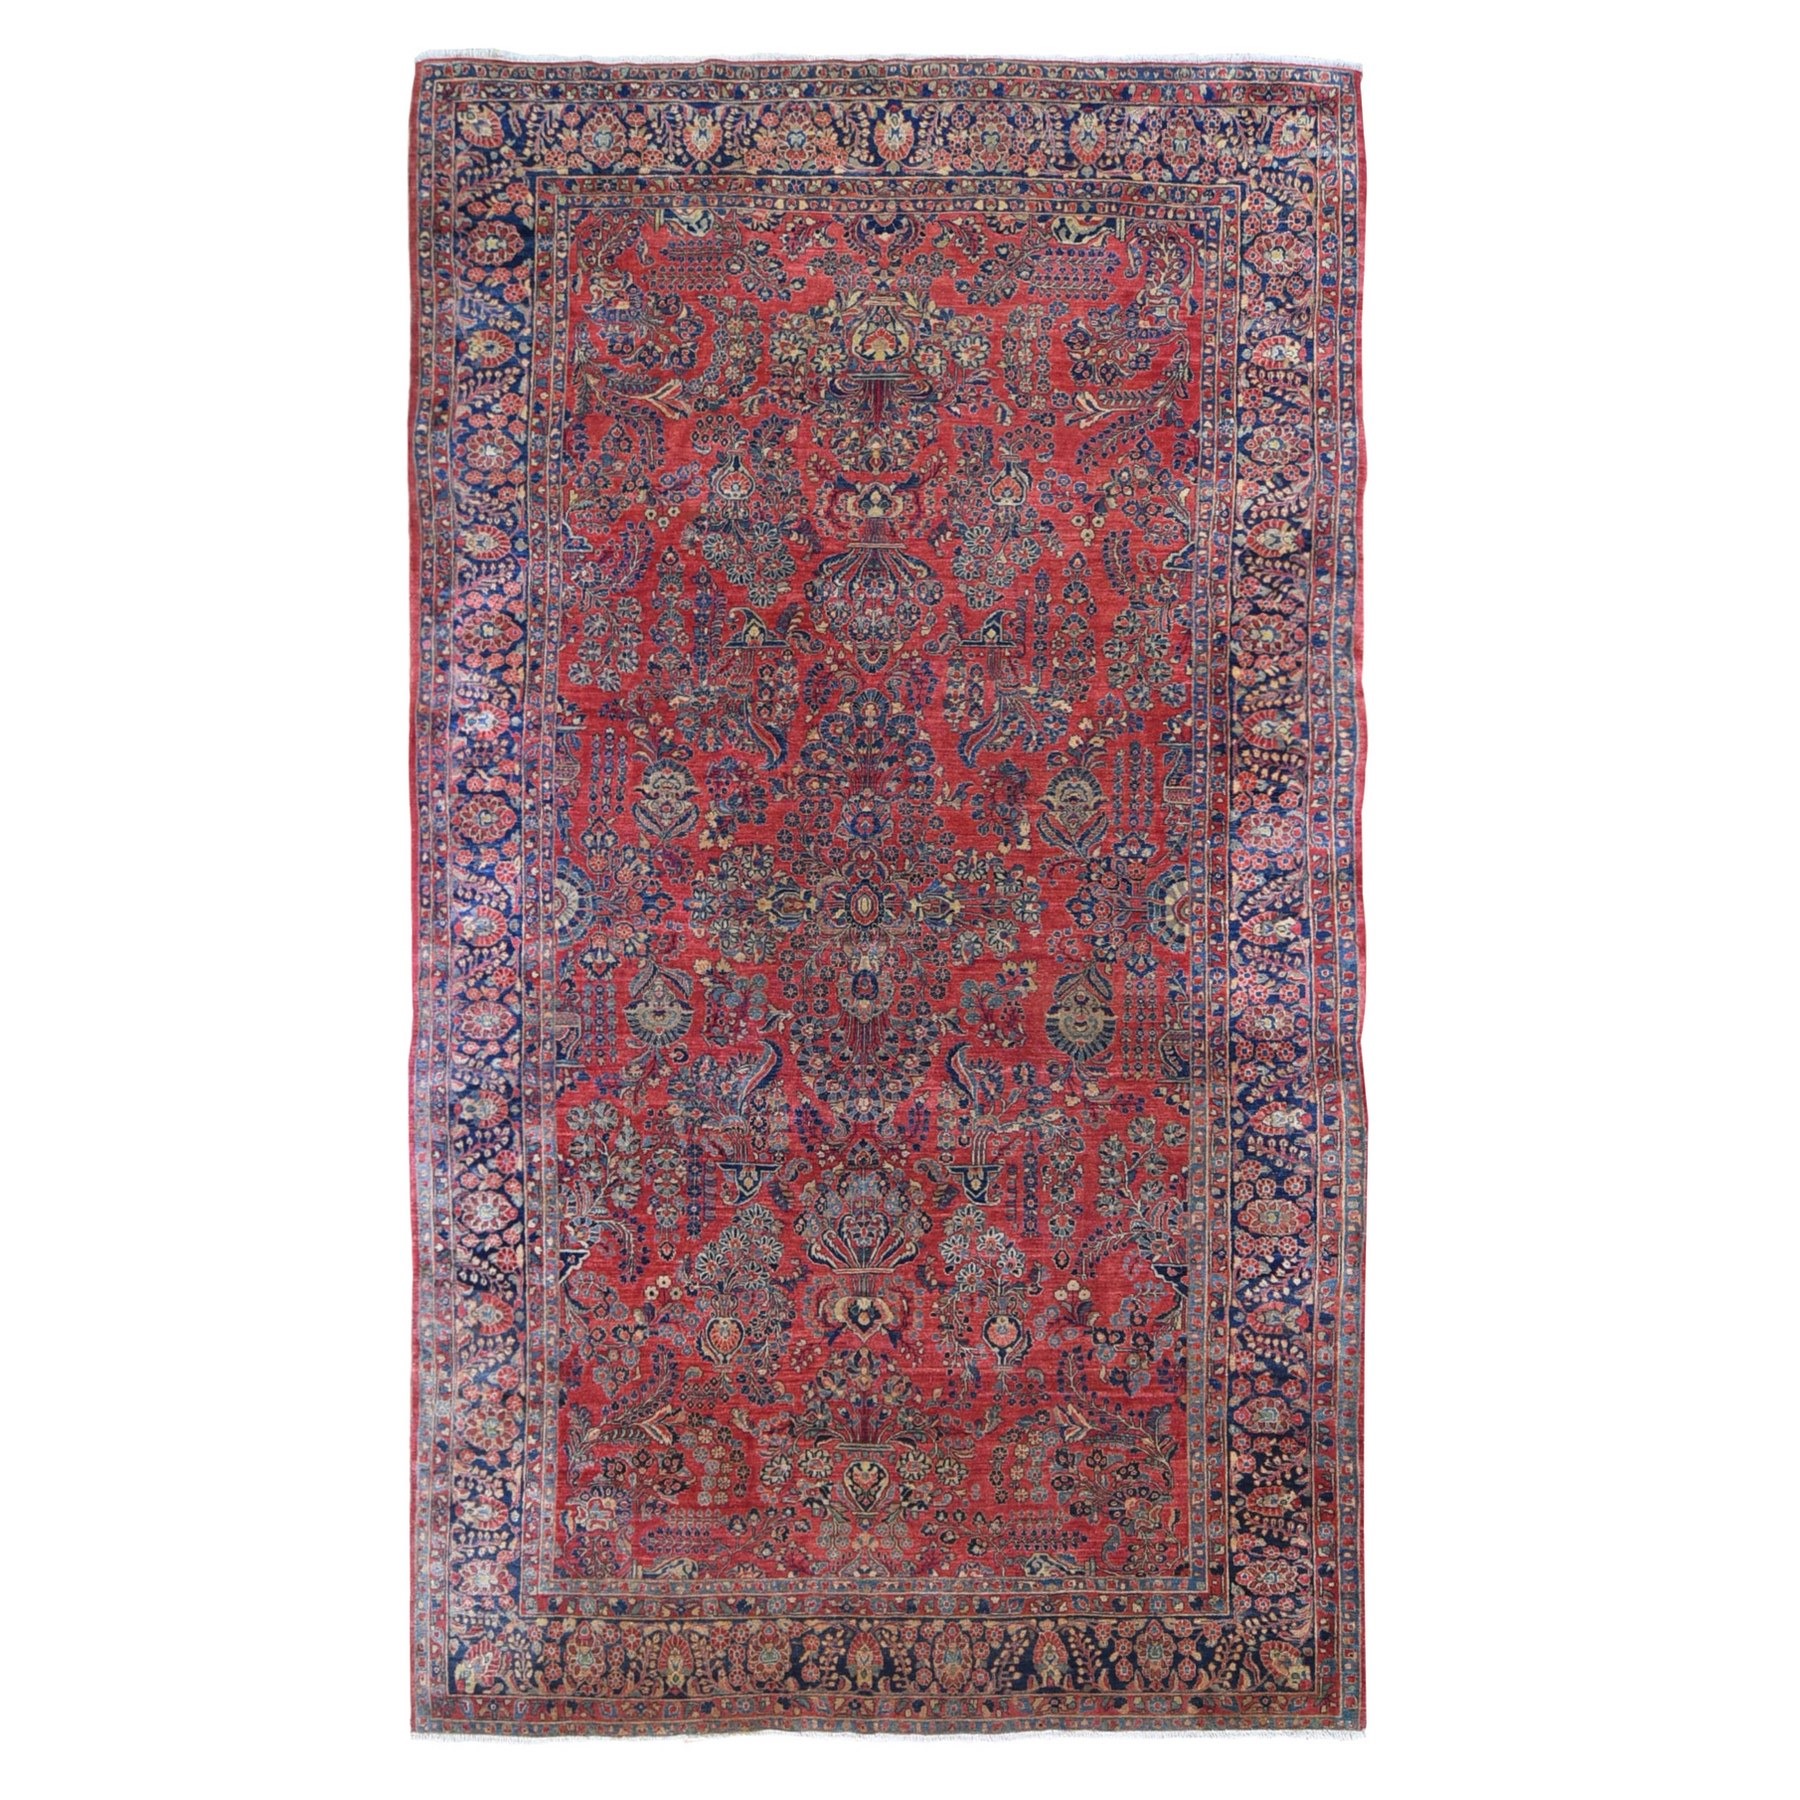 Antique Collection Hand Knotted Red Rug No: 1132584